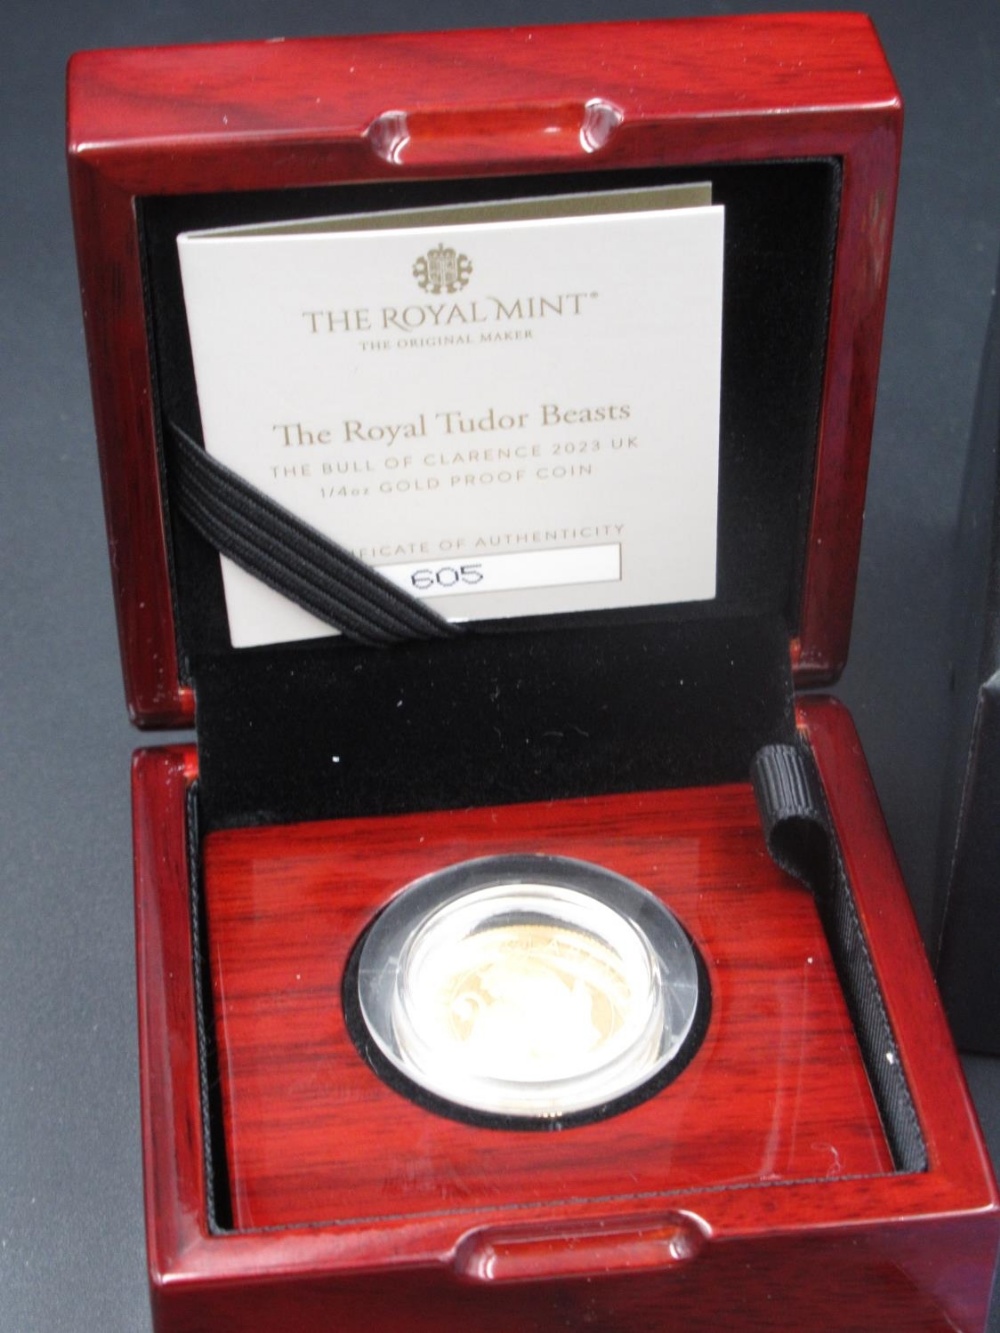 The Royal Mint cased The Royal Tudor Beasts, The Bull of Clarence £25 1/4oz Gold Proof Coin, - Image 2 of 3